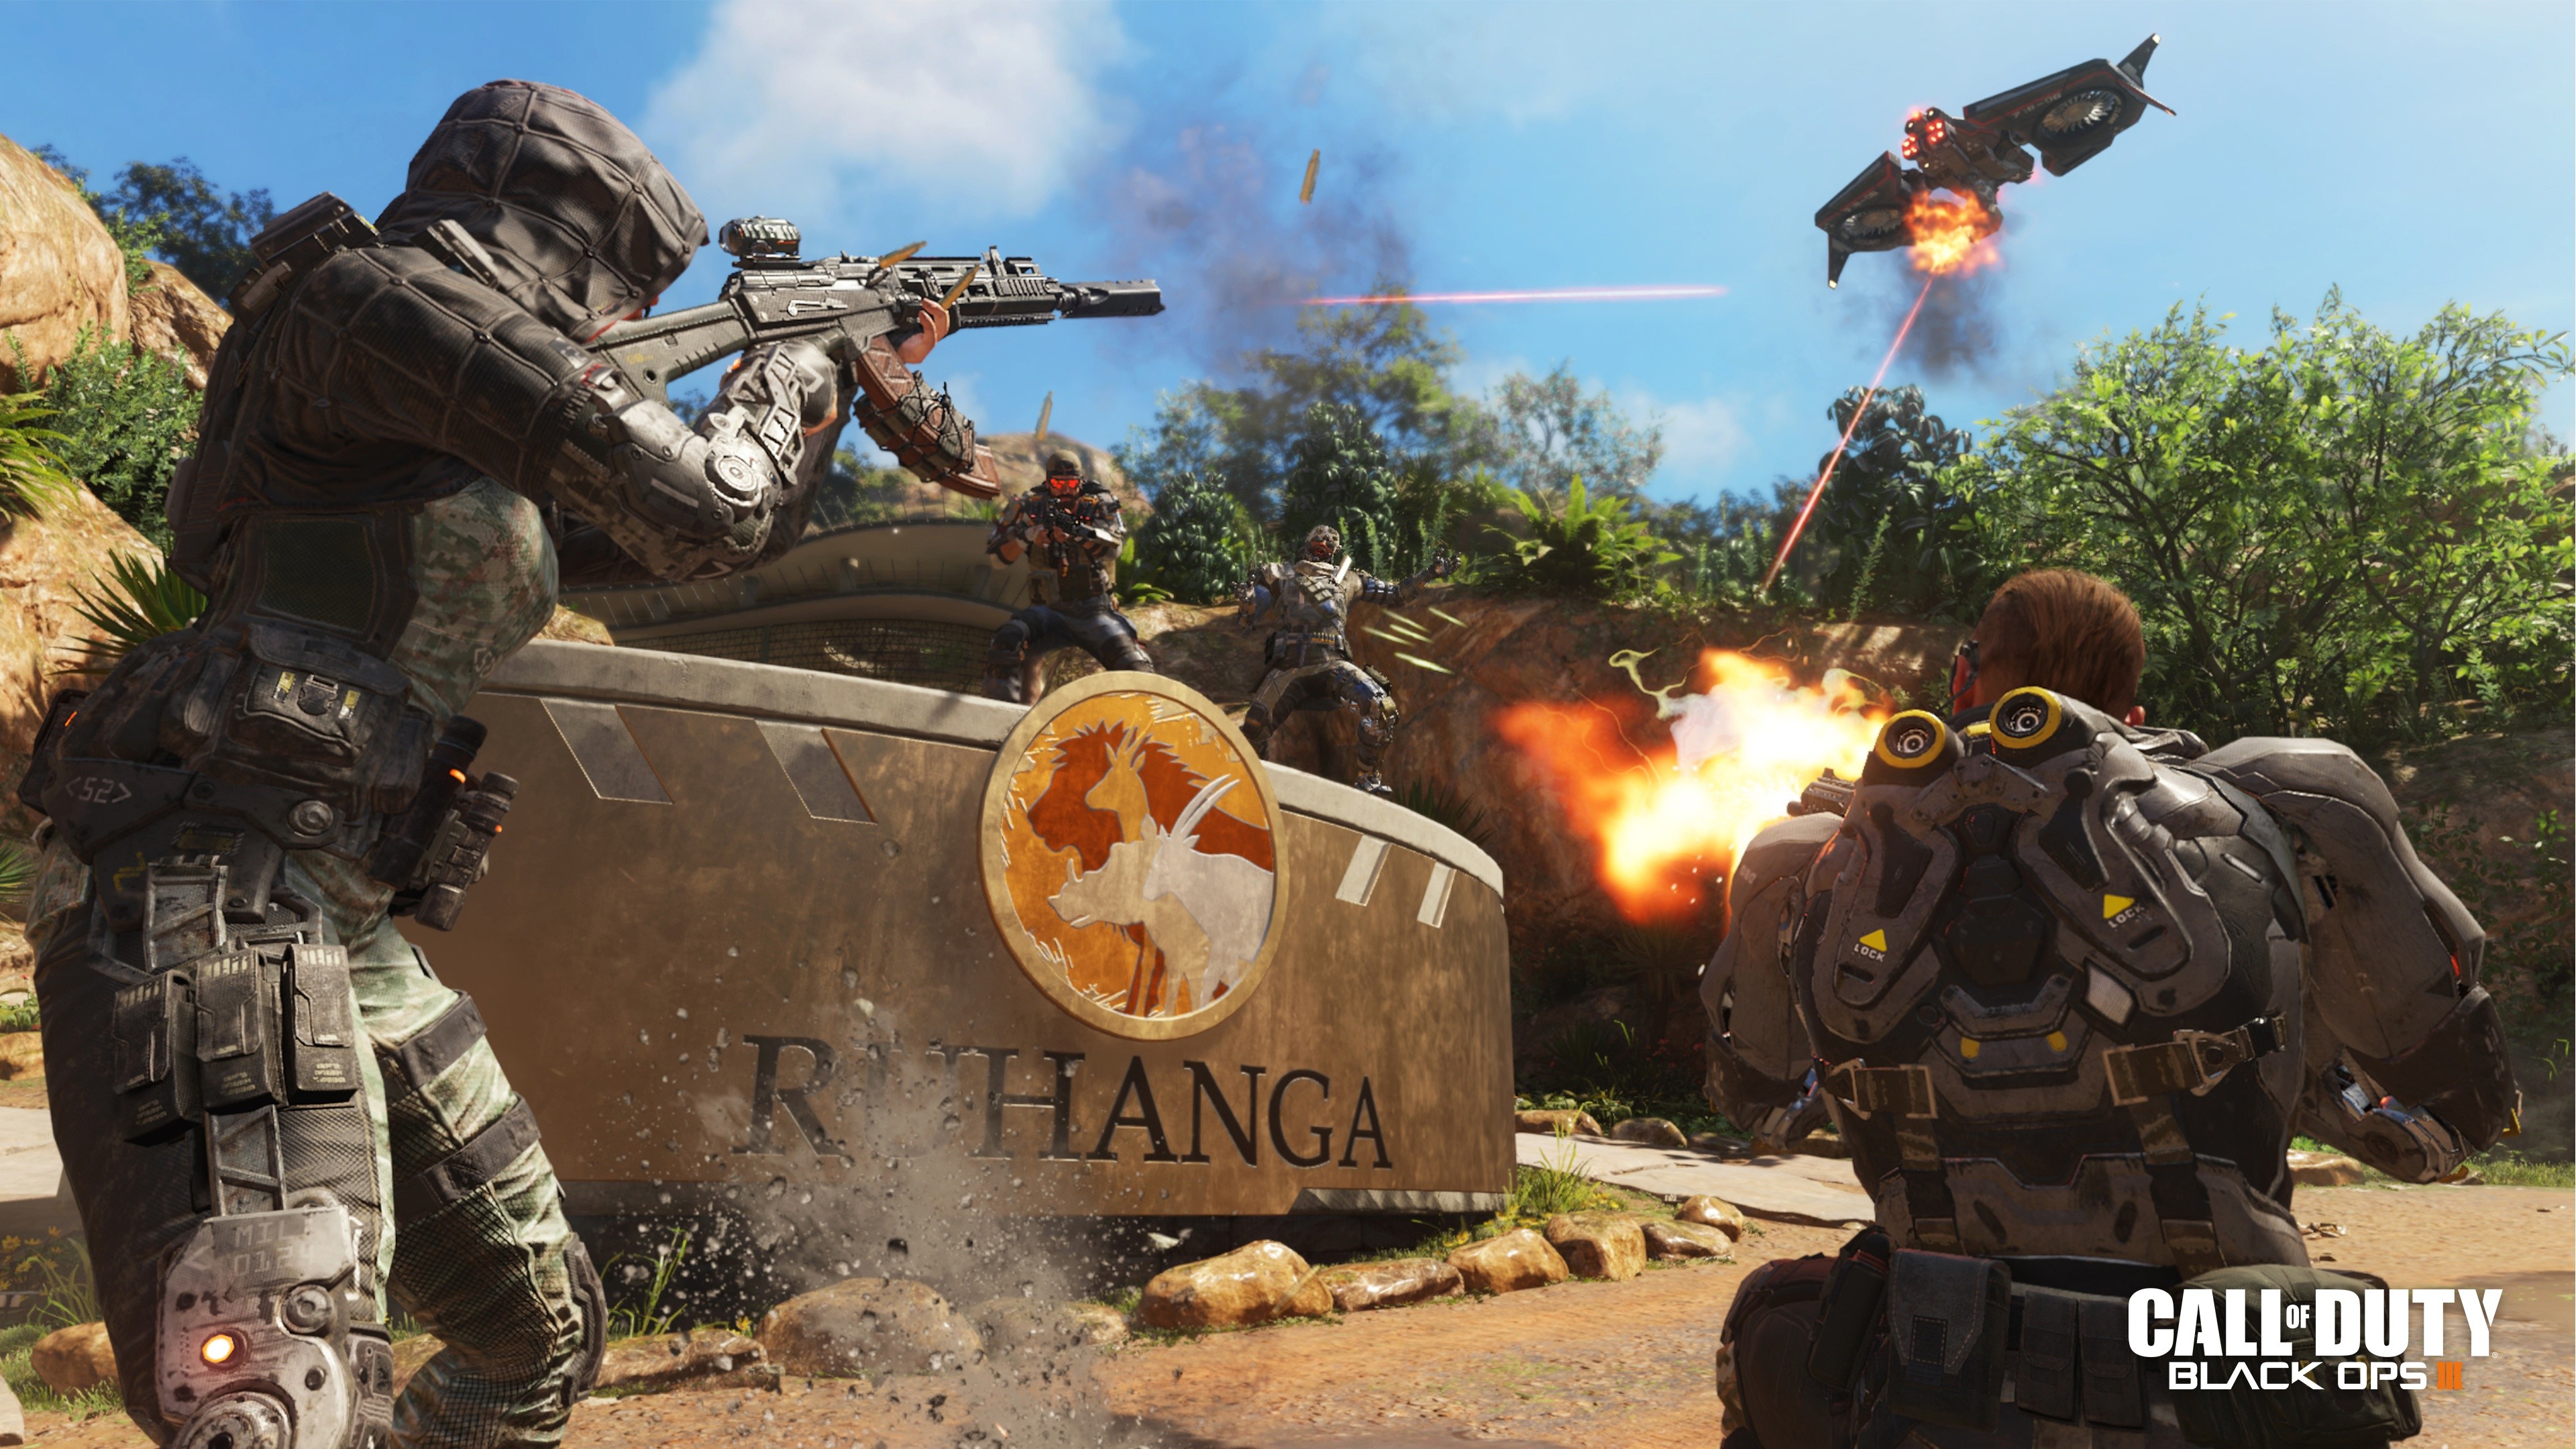 3840x2160 Call of Duty: Black Ops III - [ TOPICO OFICIAL ] | Forum | Epic